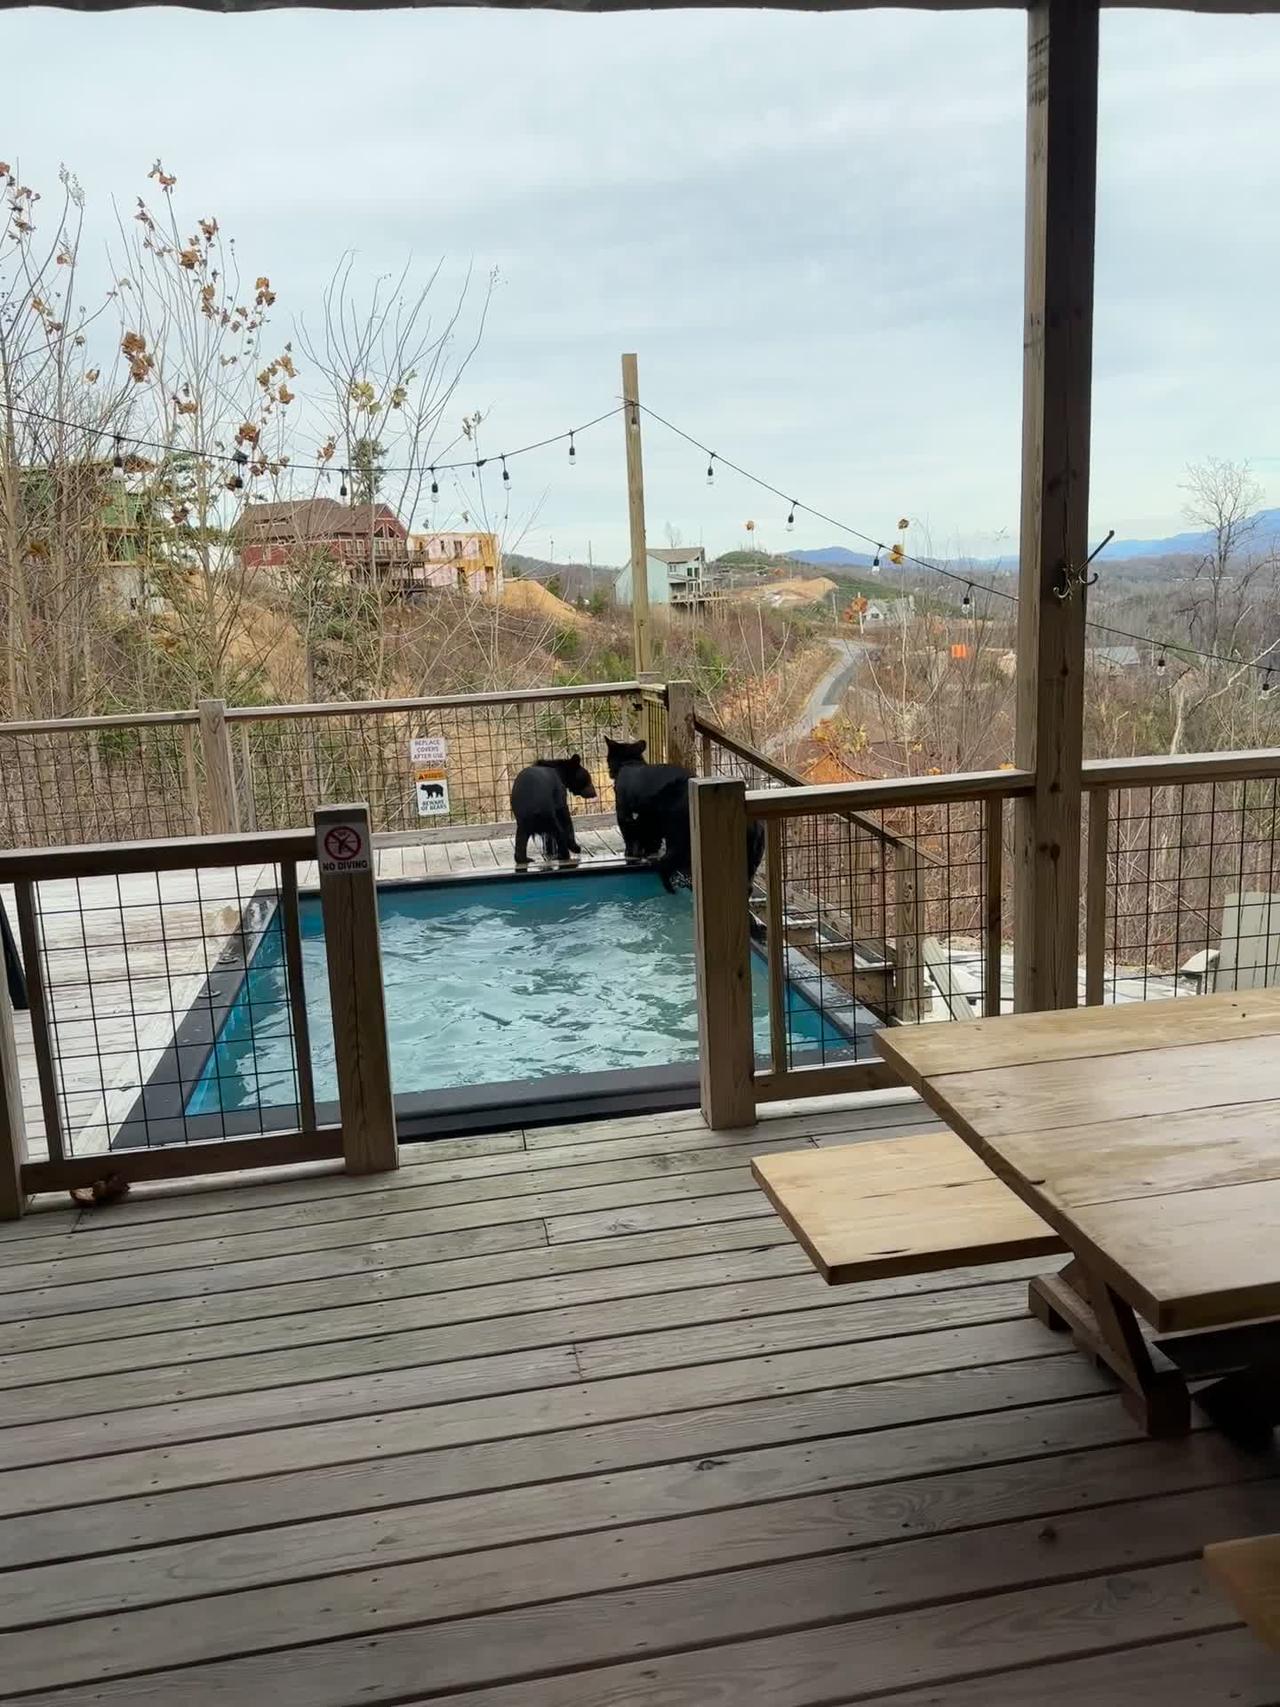 Black Bear Cubs Play in Airbnb Pool on Vacation